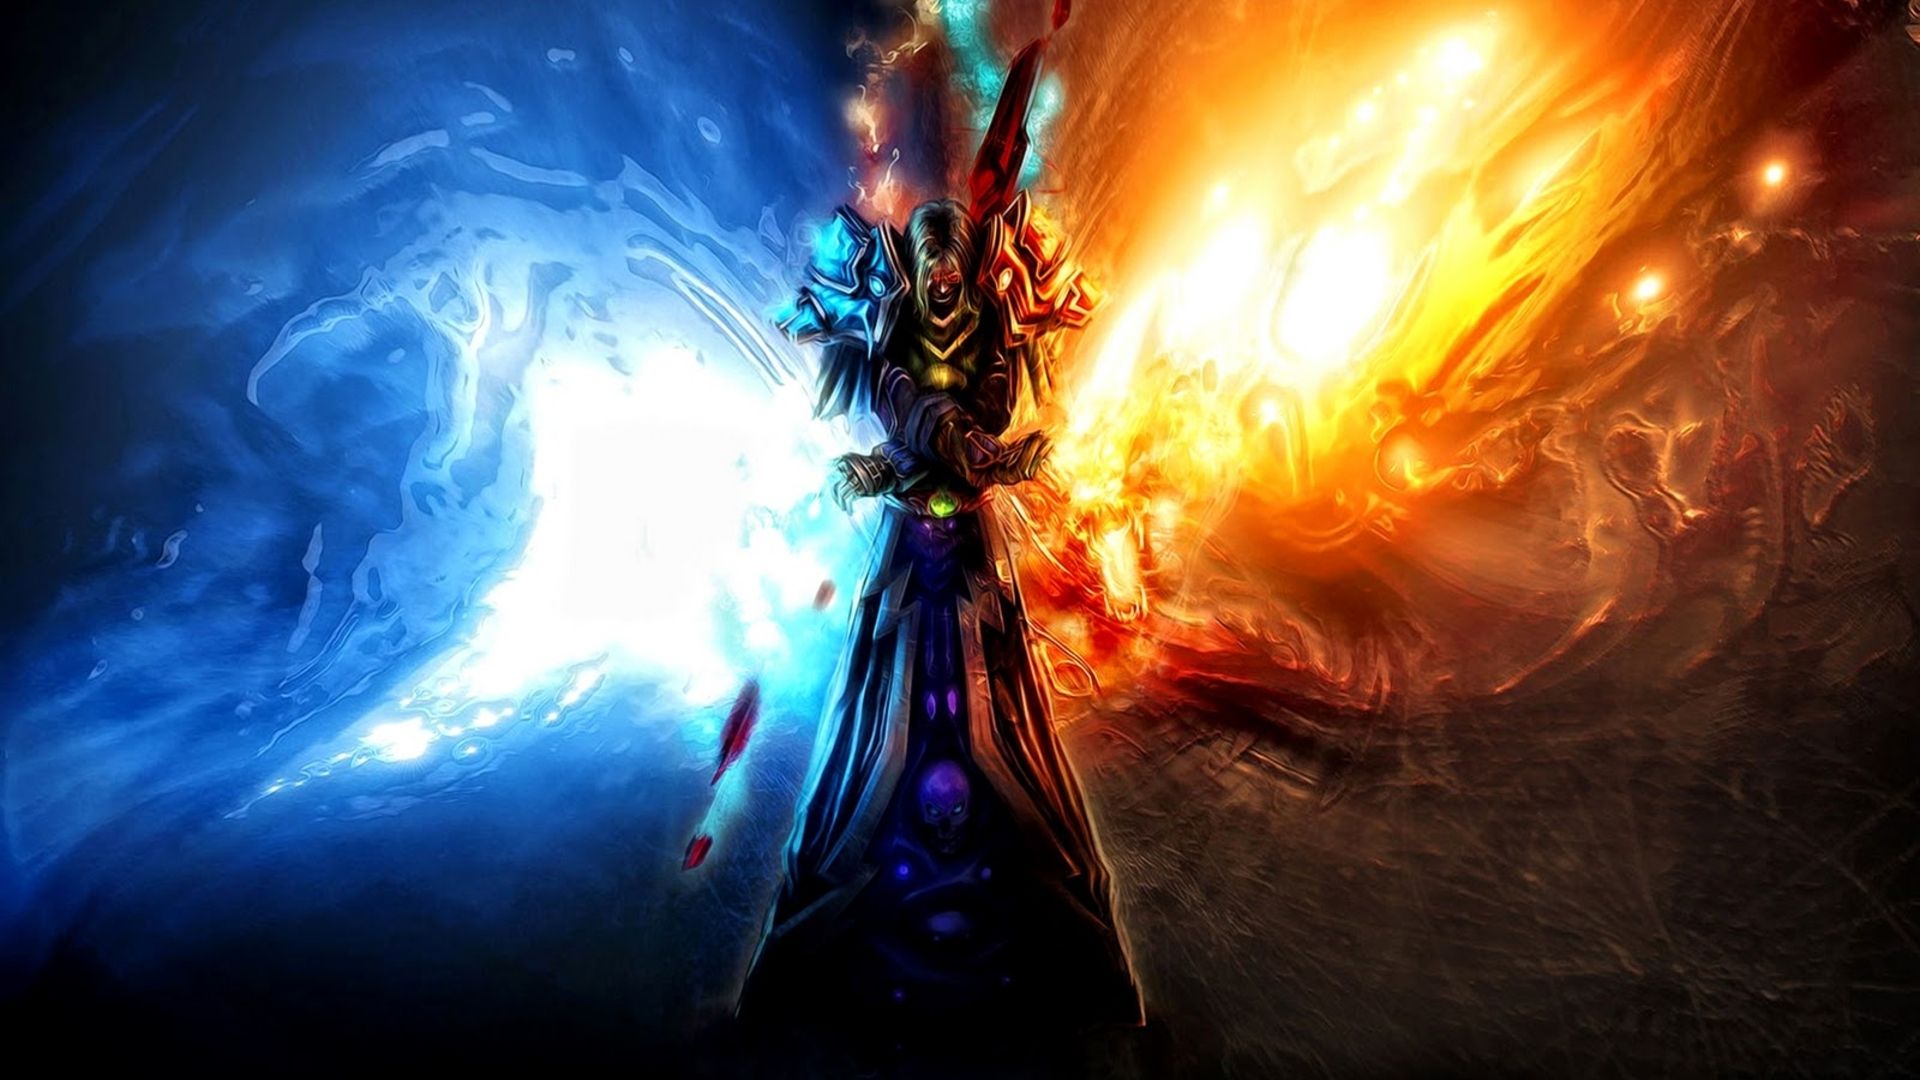 Free download Cool Fire And Ice Background Image Picture Becuo